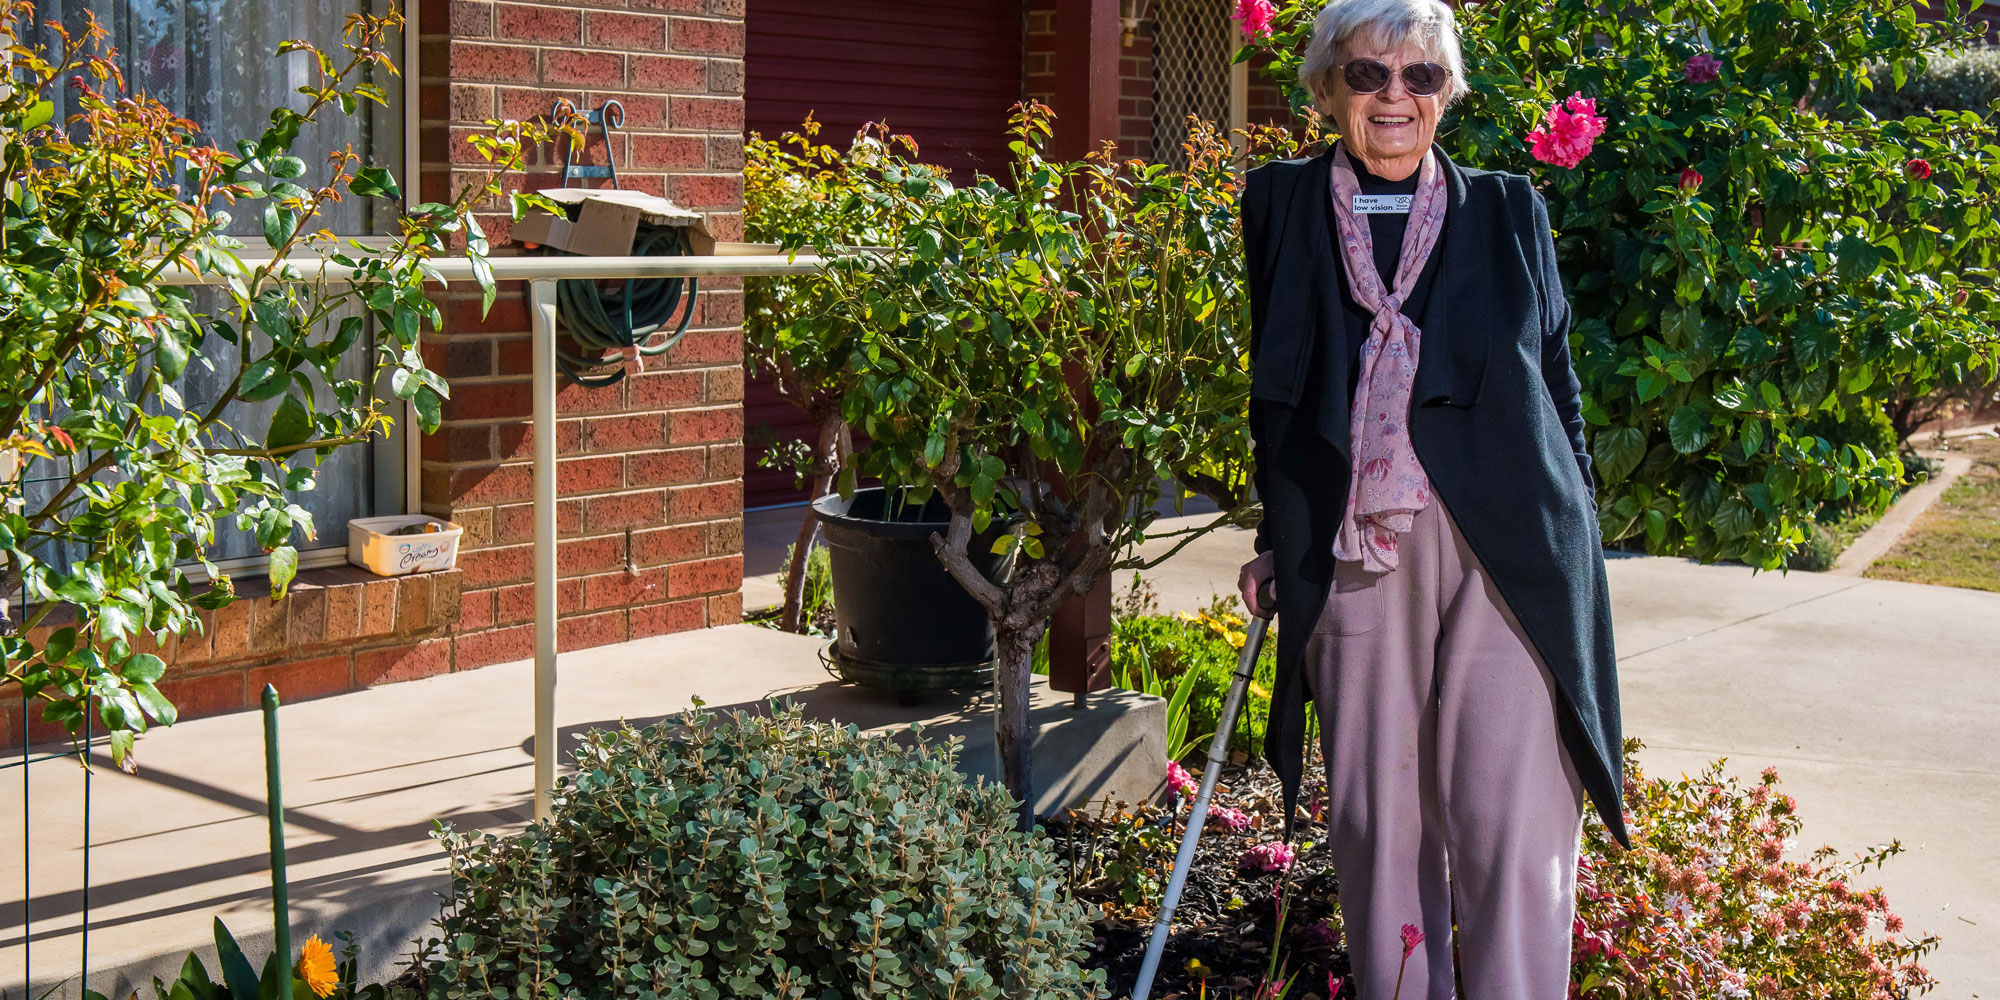 Wilma Mitchell smiling with sunglasses on, standing with her walking stick in her garden